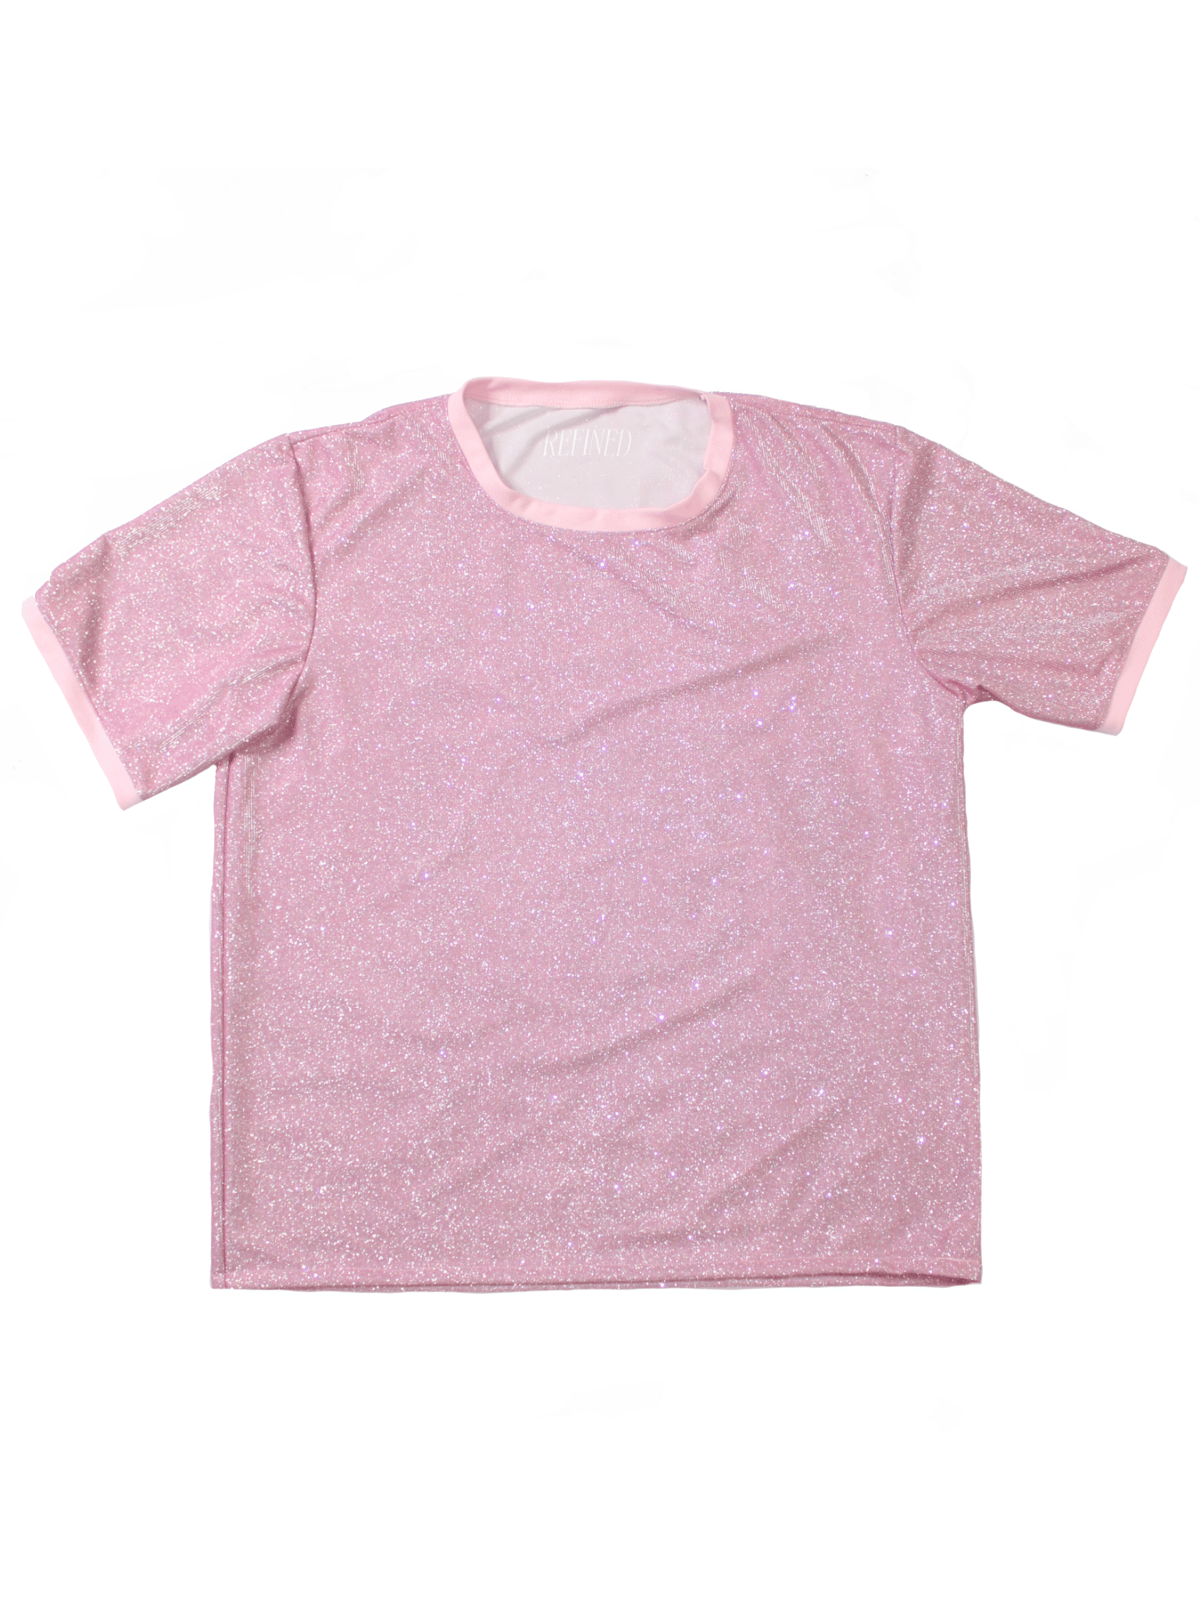 Image of Pink glitter shirt (full length and cropped)